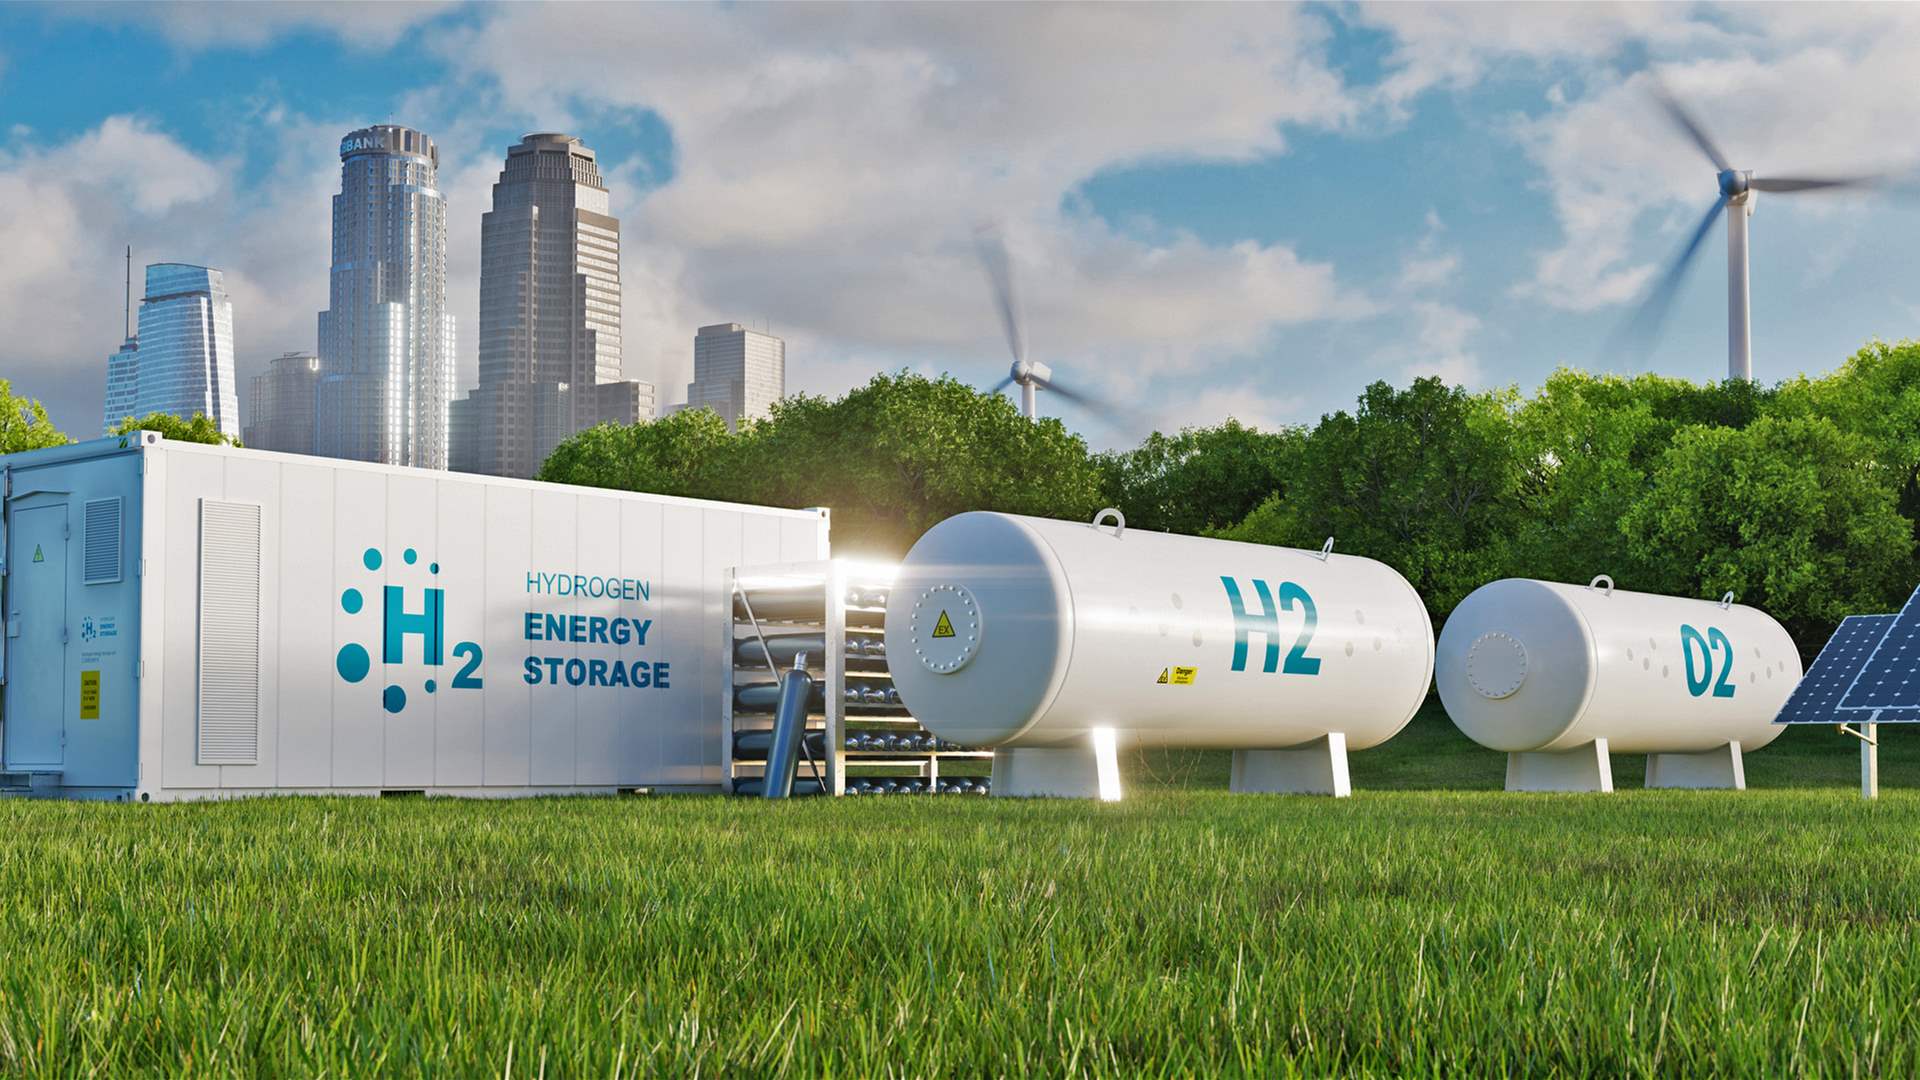 Gulf countries bet on green hydrogen as &quot;fuel for the future&quot;